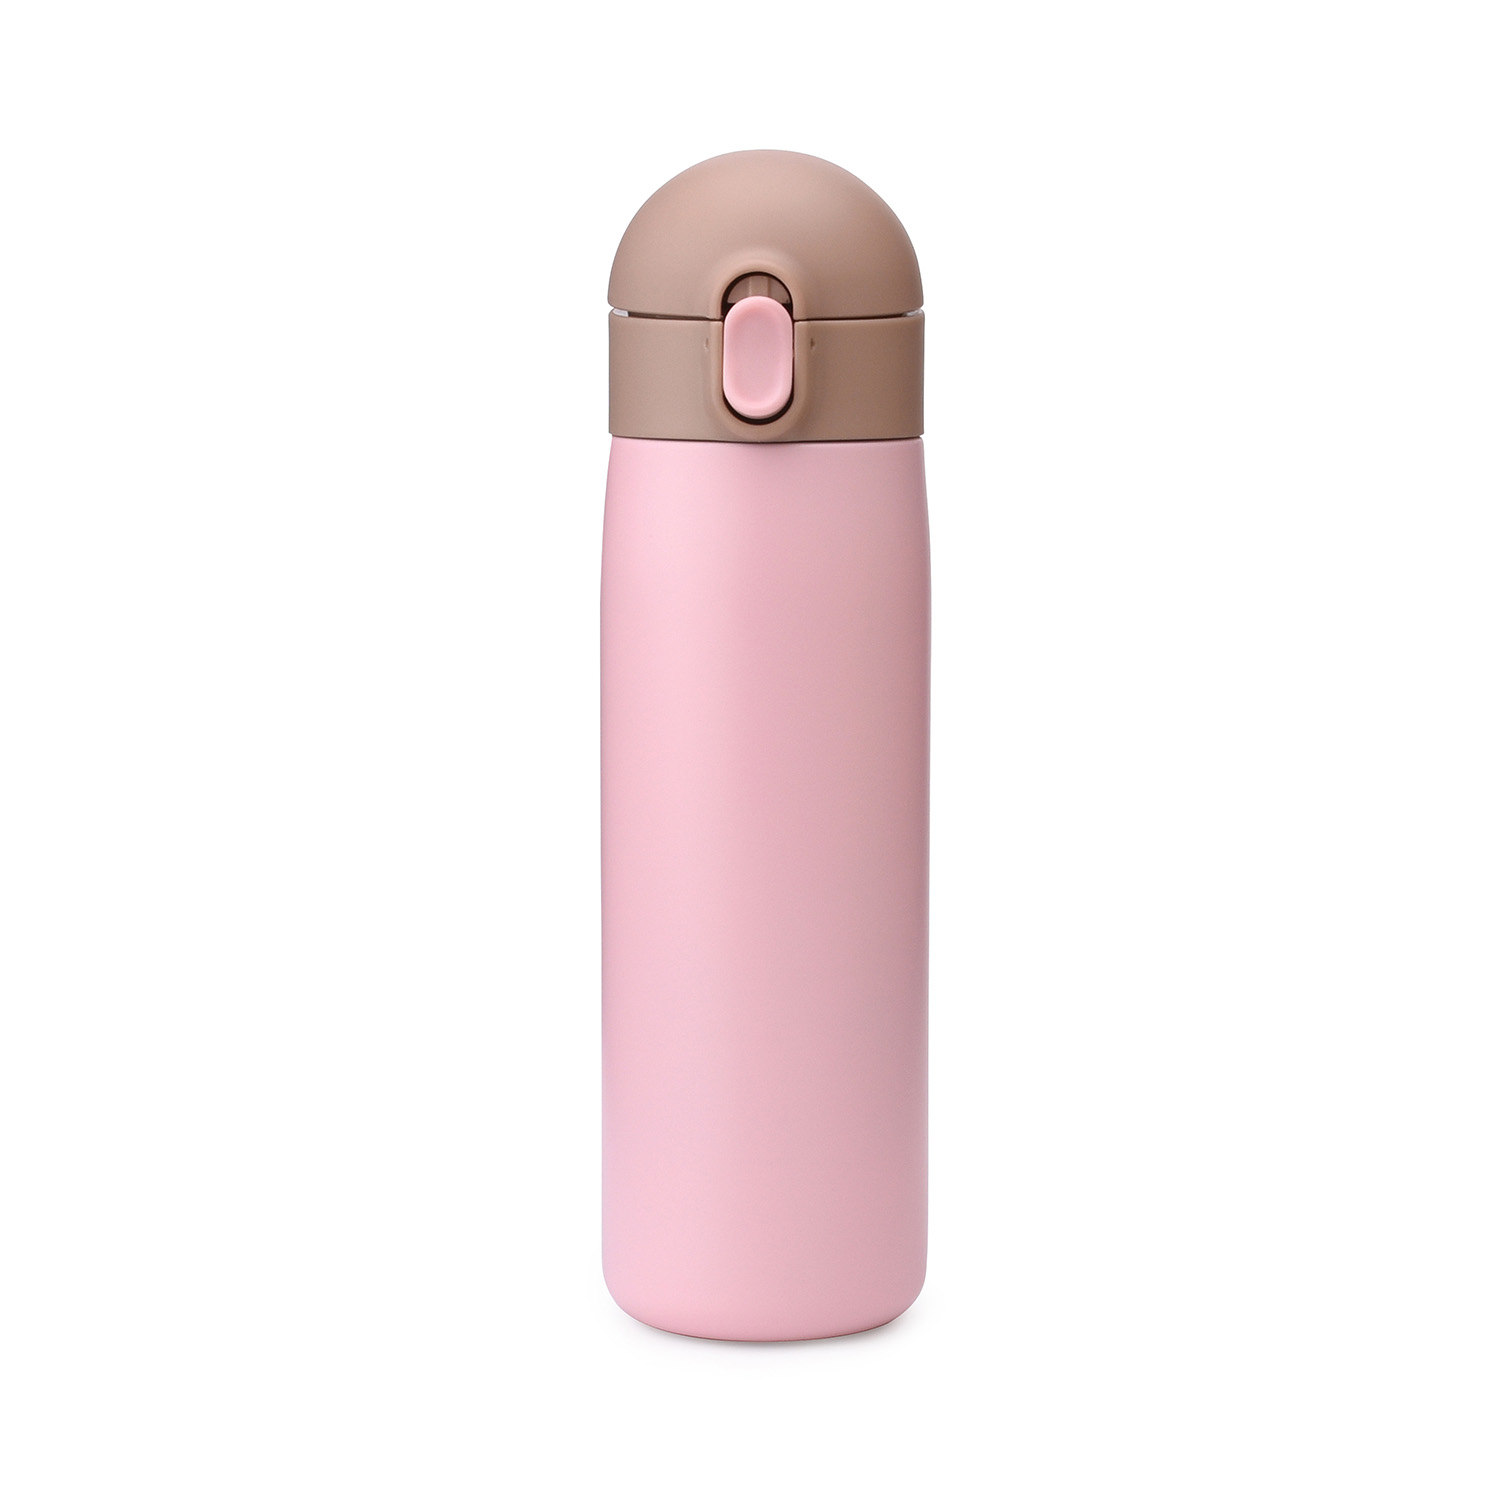 https://www.waterbottle.tech/wp-content/uploads/2019/10/insulated-stainless-steel-water-bottle-with-silicone-handle-s12300f1-1.jpg